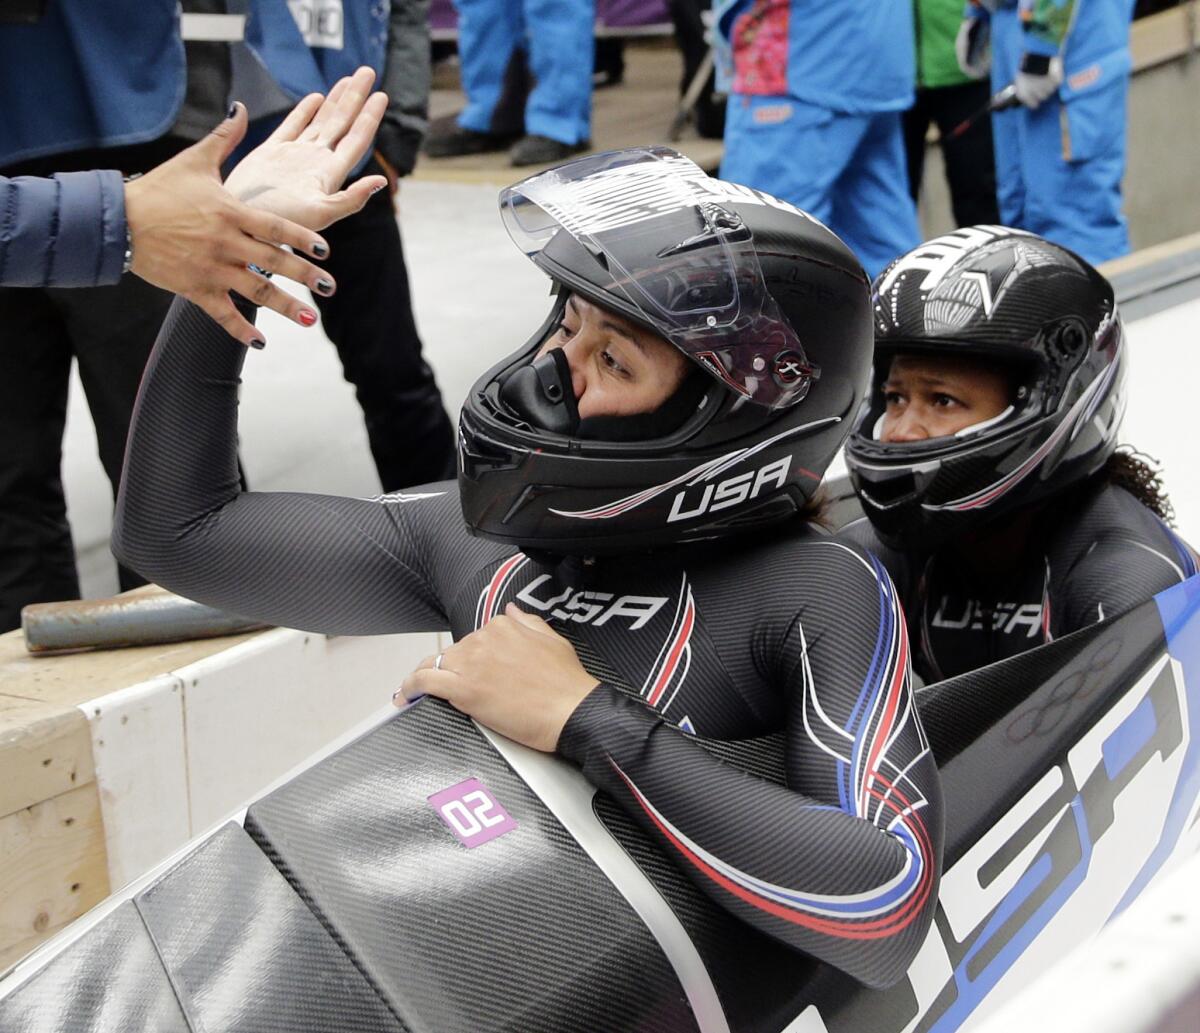 Elana Meyers Taylor, left, and brakeman Lauryn Williams are congratulated after their silver medal run at the 2014 Winter Olympics in February.